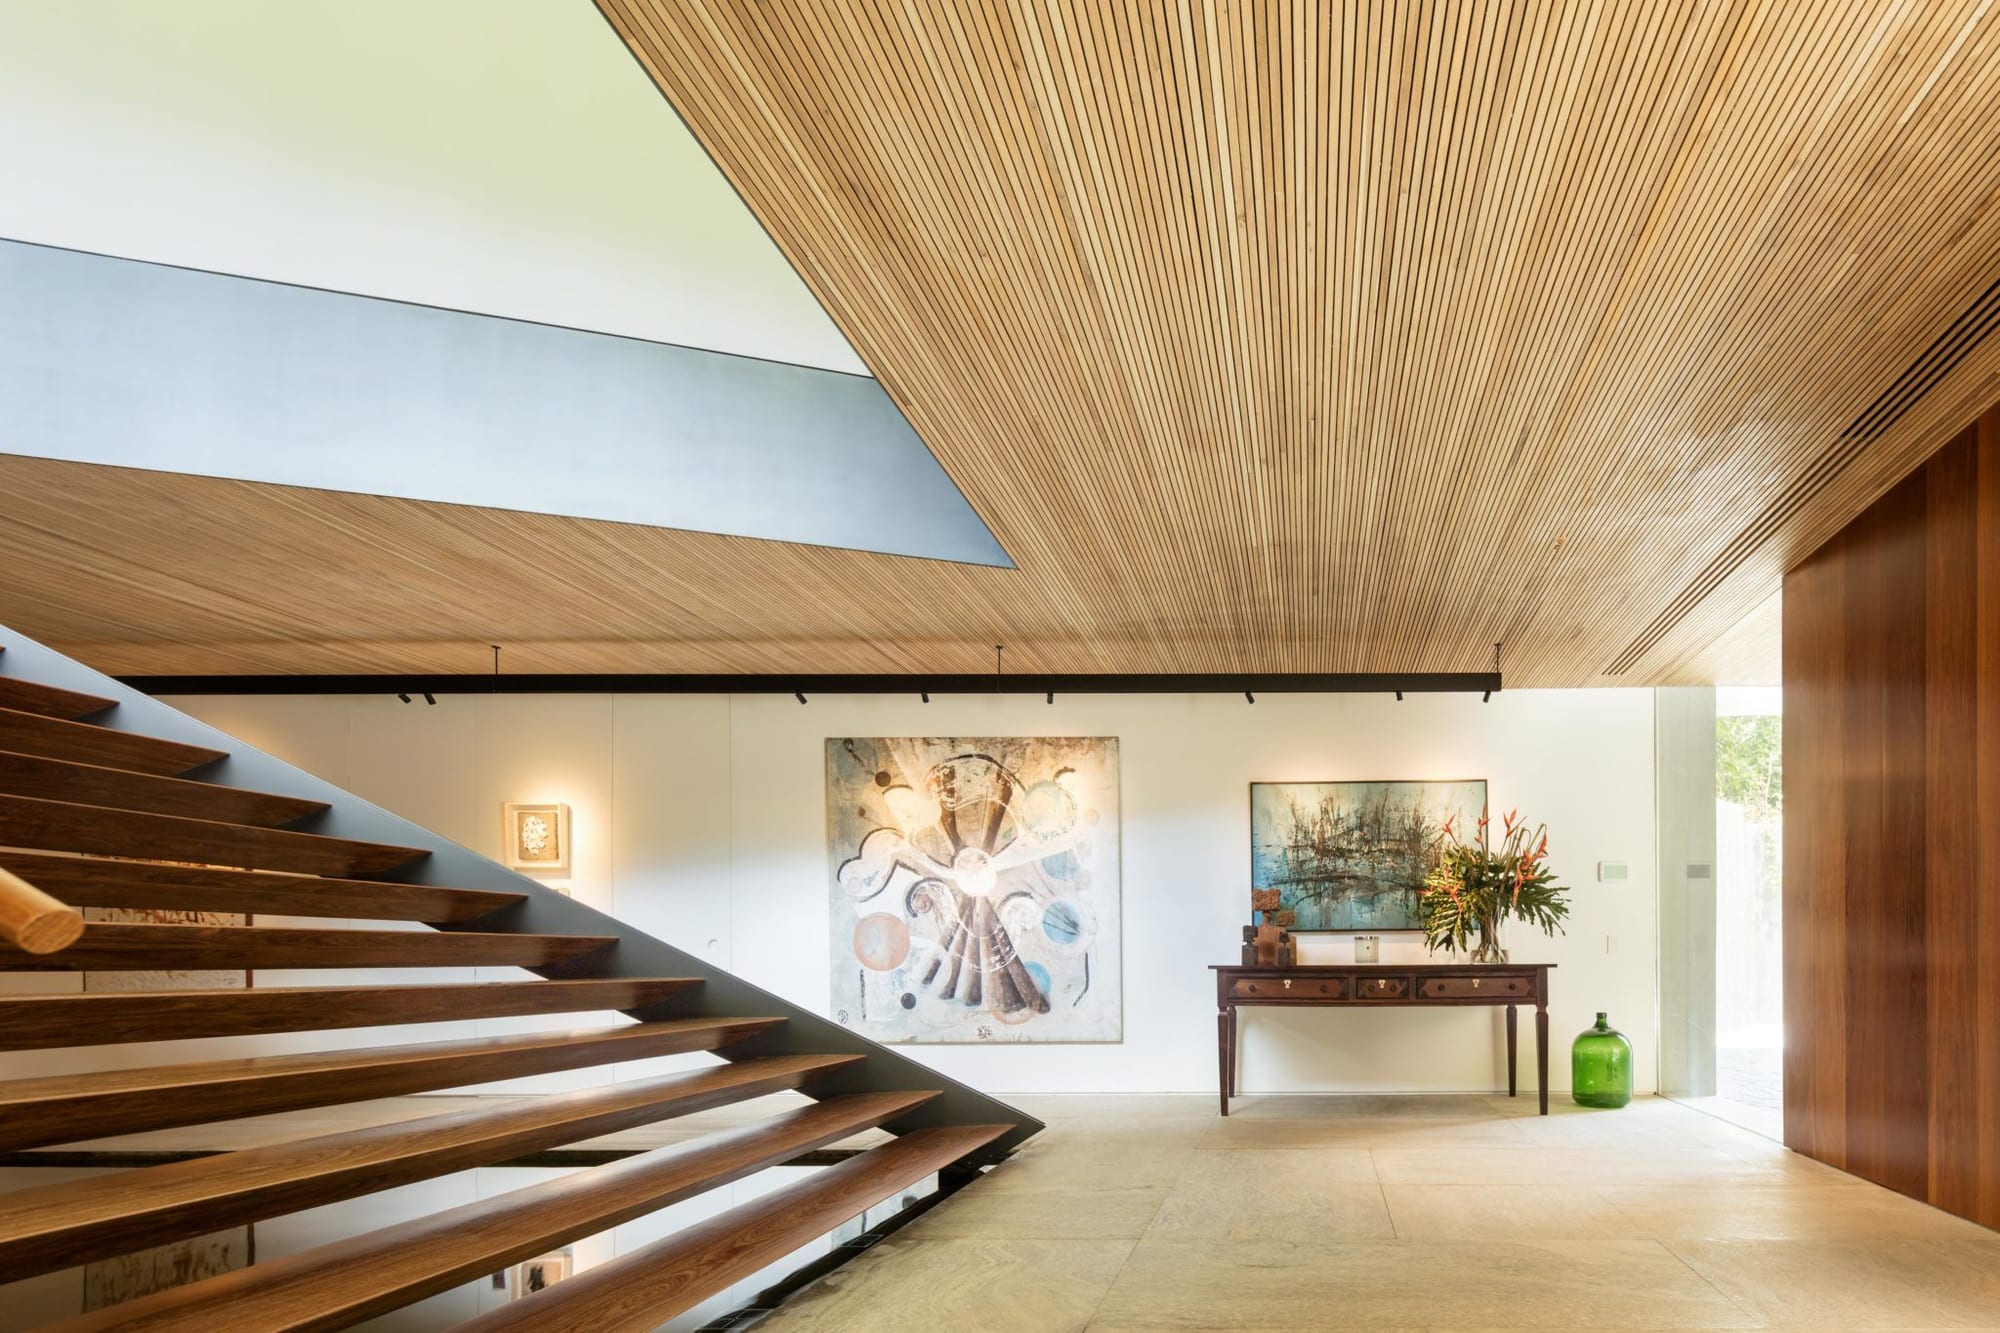 Spacious foyer/entryway inside the Bernardes Arquitetura-designed Asa House, adorned with timber slats in the ceiling and granite floors.